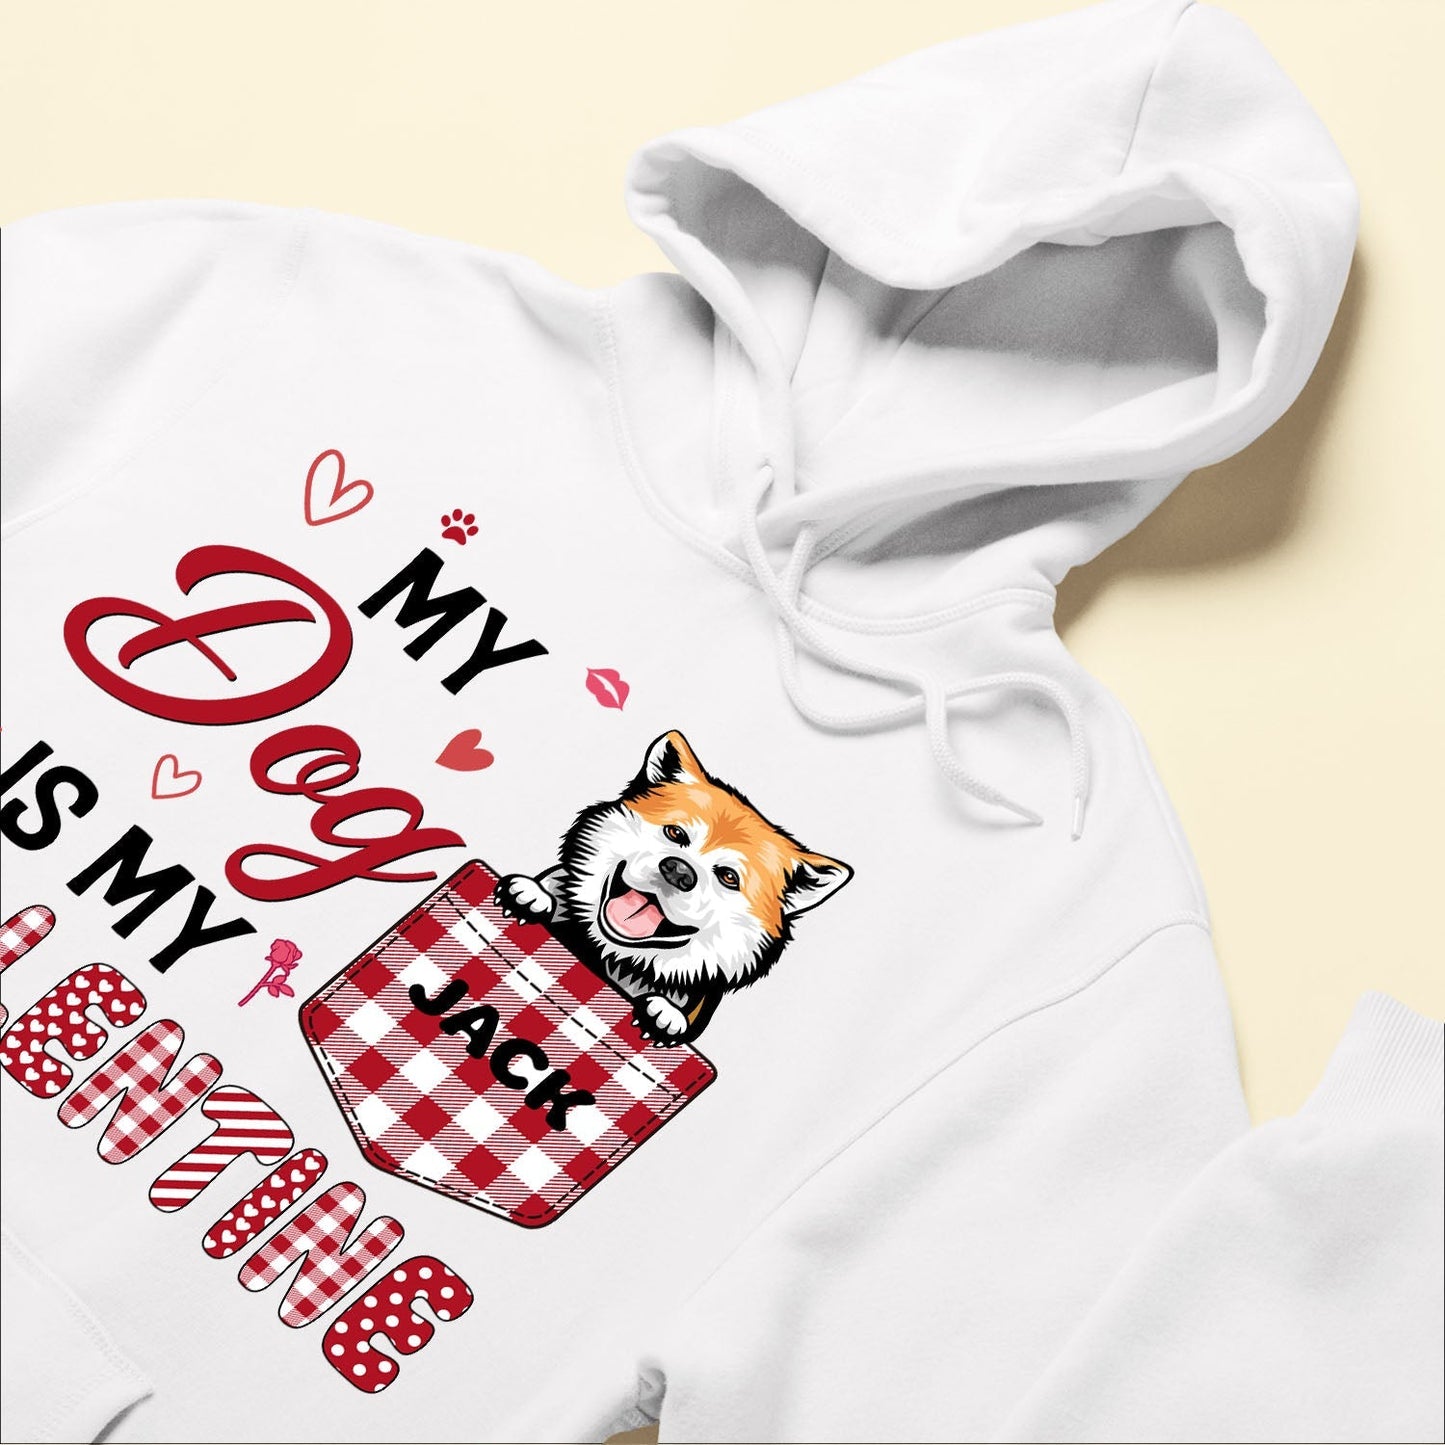 My Fur Baby Is My Valentine - Personalized Shirt - Valentine'S Day, Loving Gift For Cat & Dog Lover, Dog Mom, Cat Mom, Dog Dad, Cat Dad